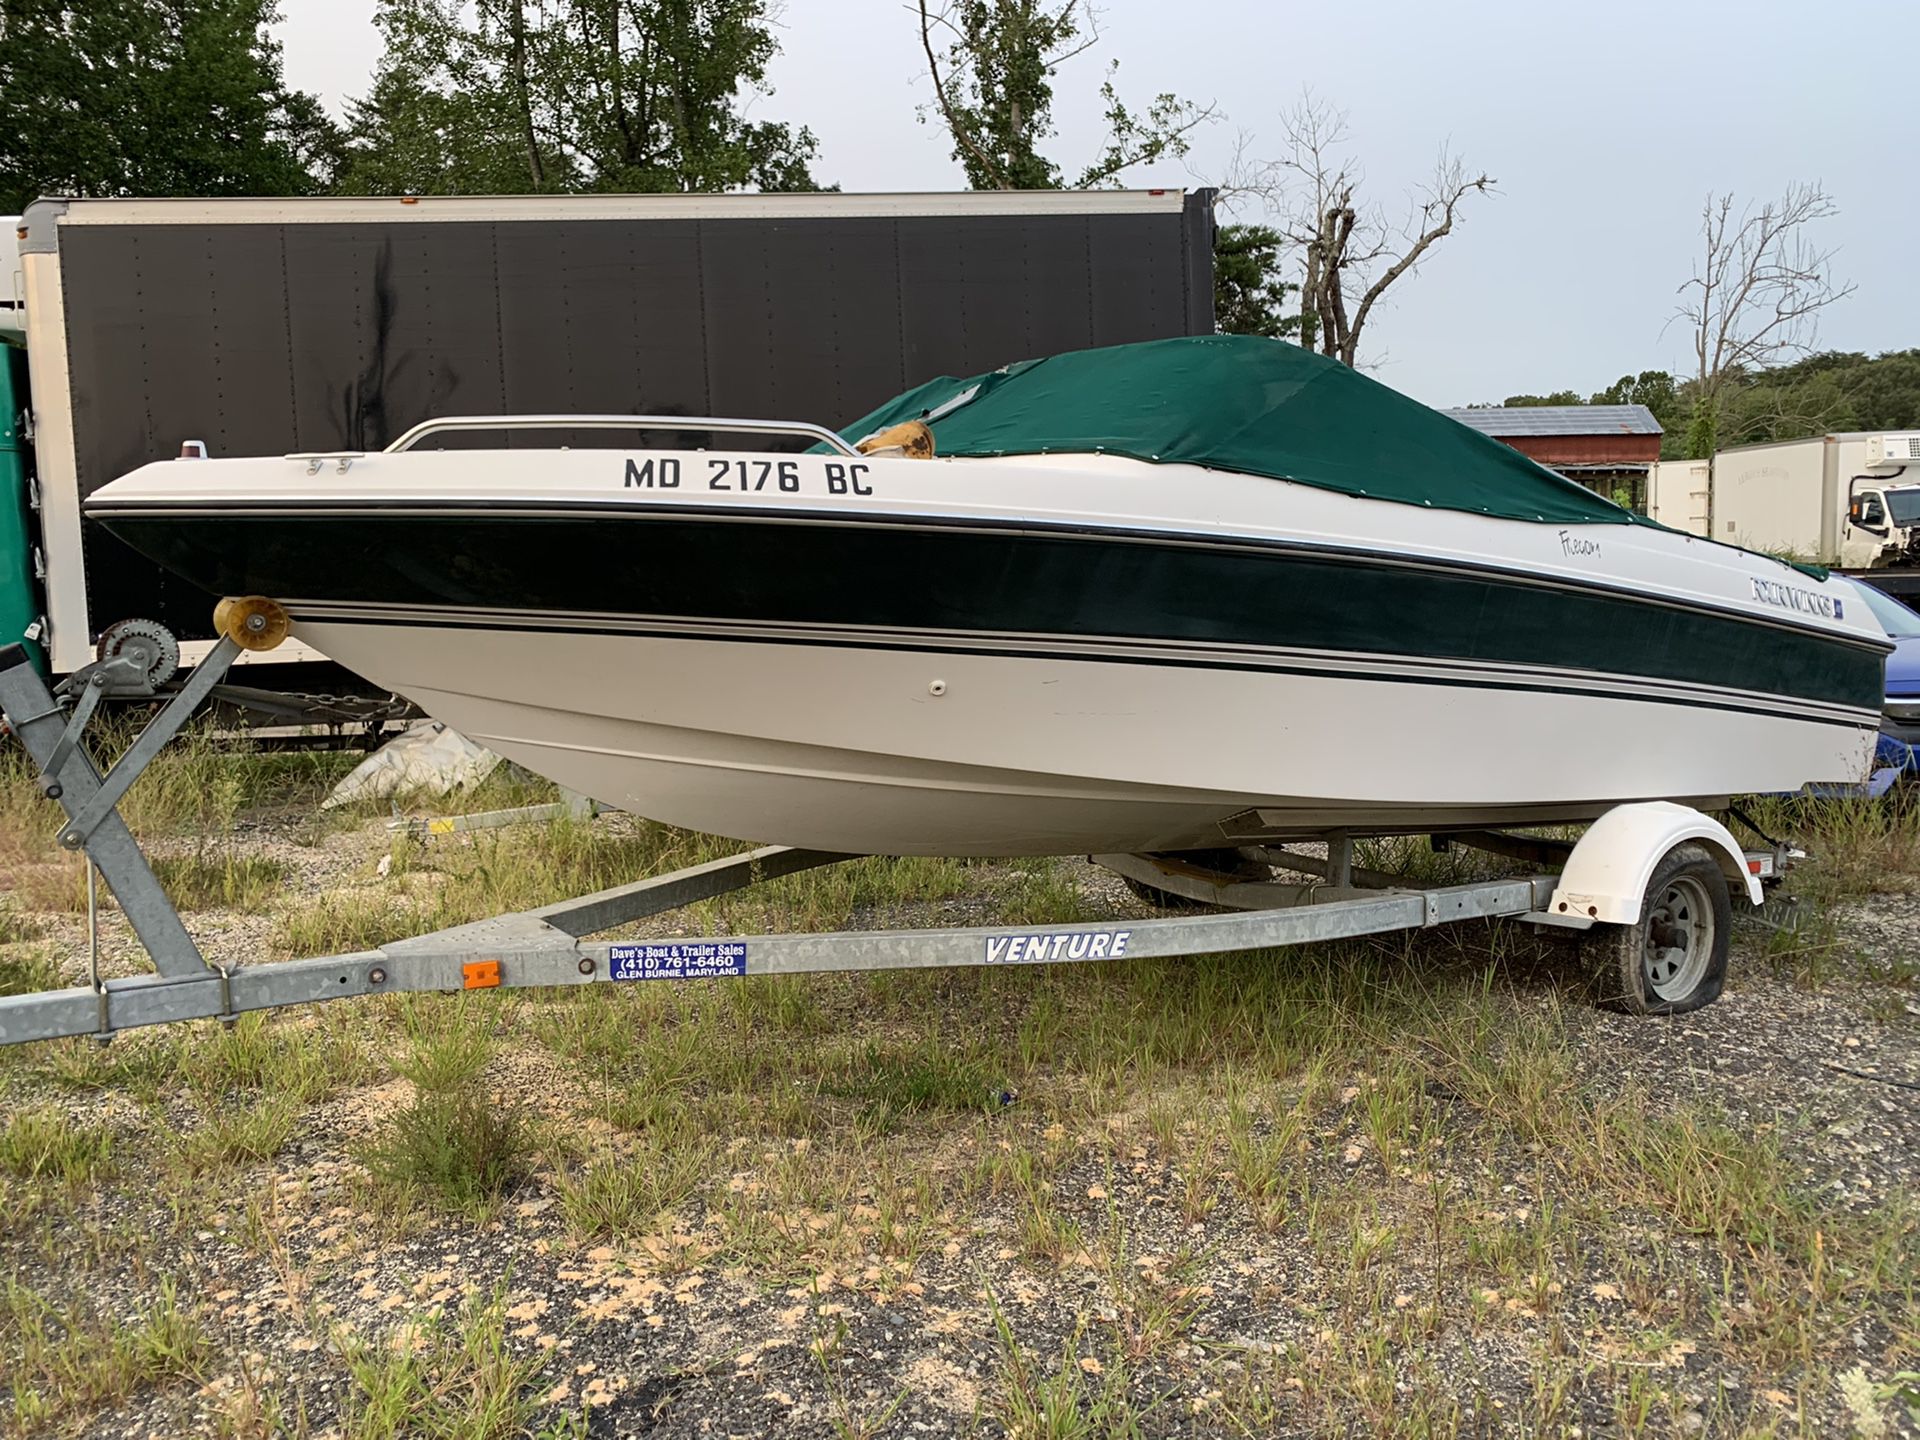 1995 Four Winns 17.6ft boat with trailer